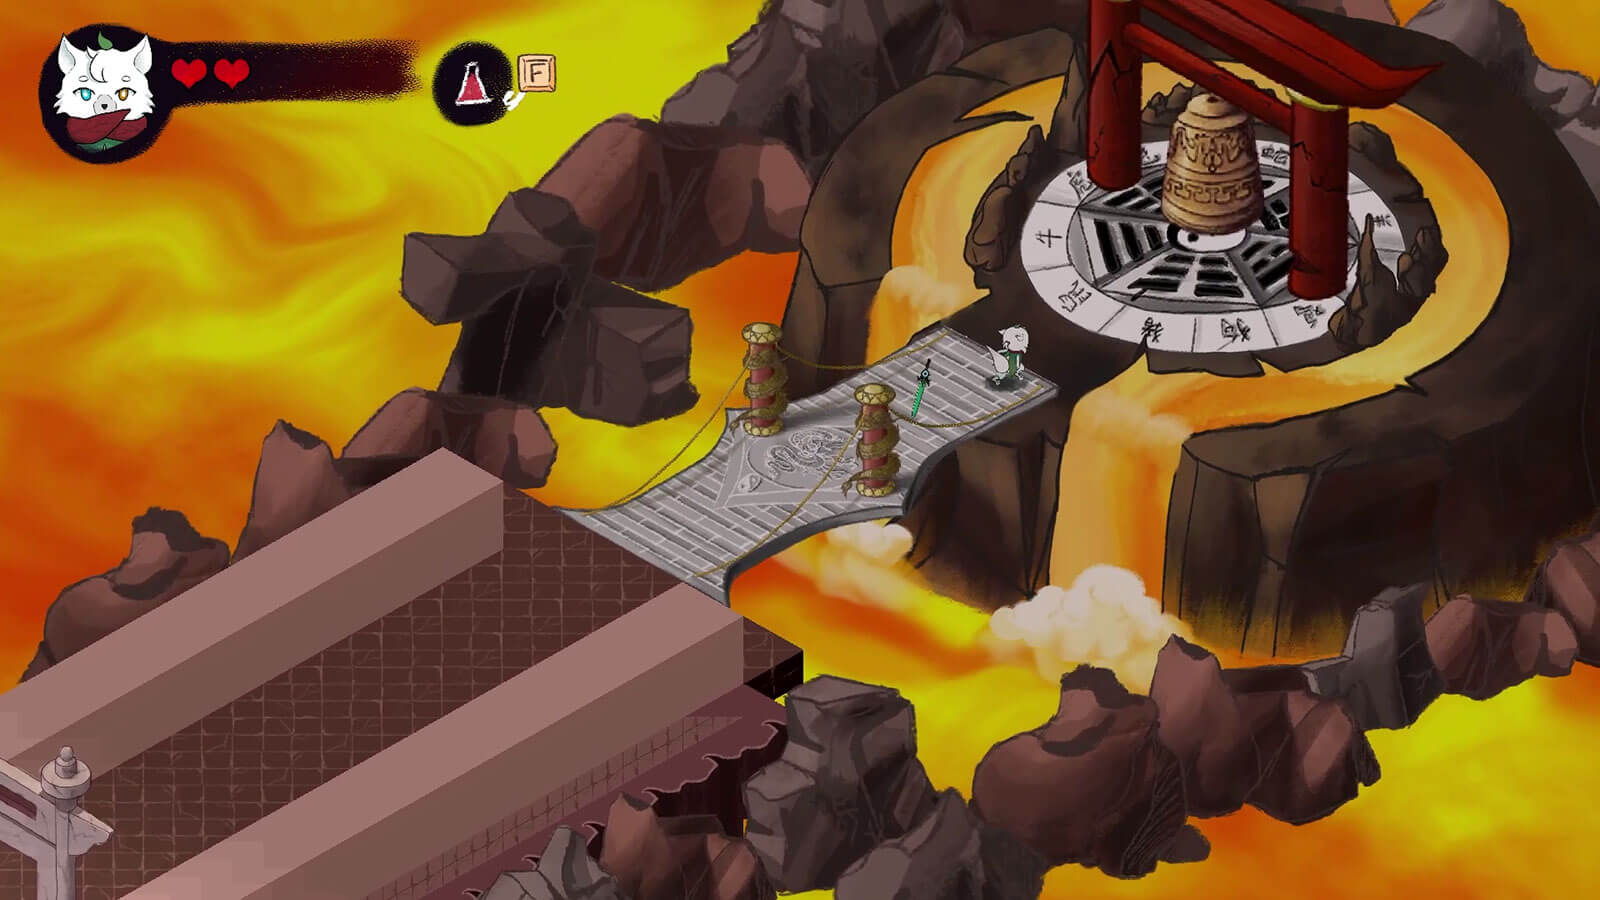 Character traverses a bridge over lava to a platform with Chinese zodiac symbols on the ground